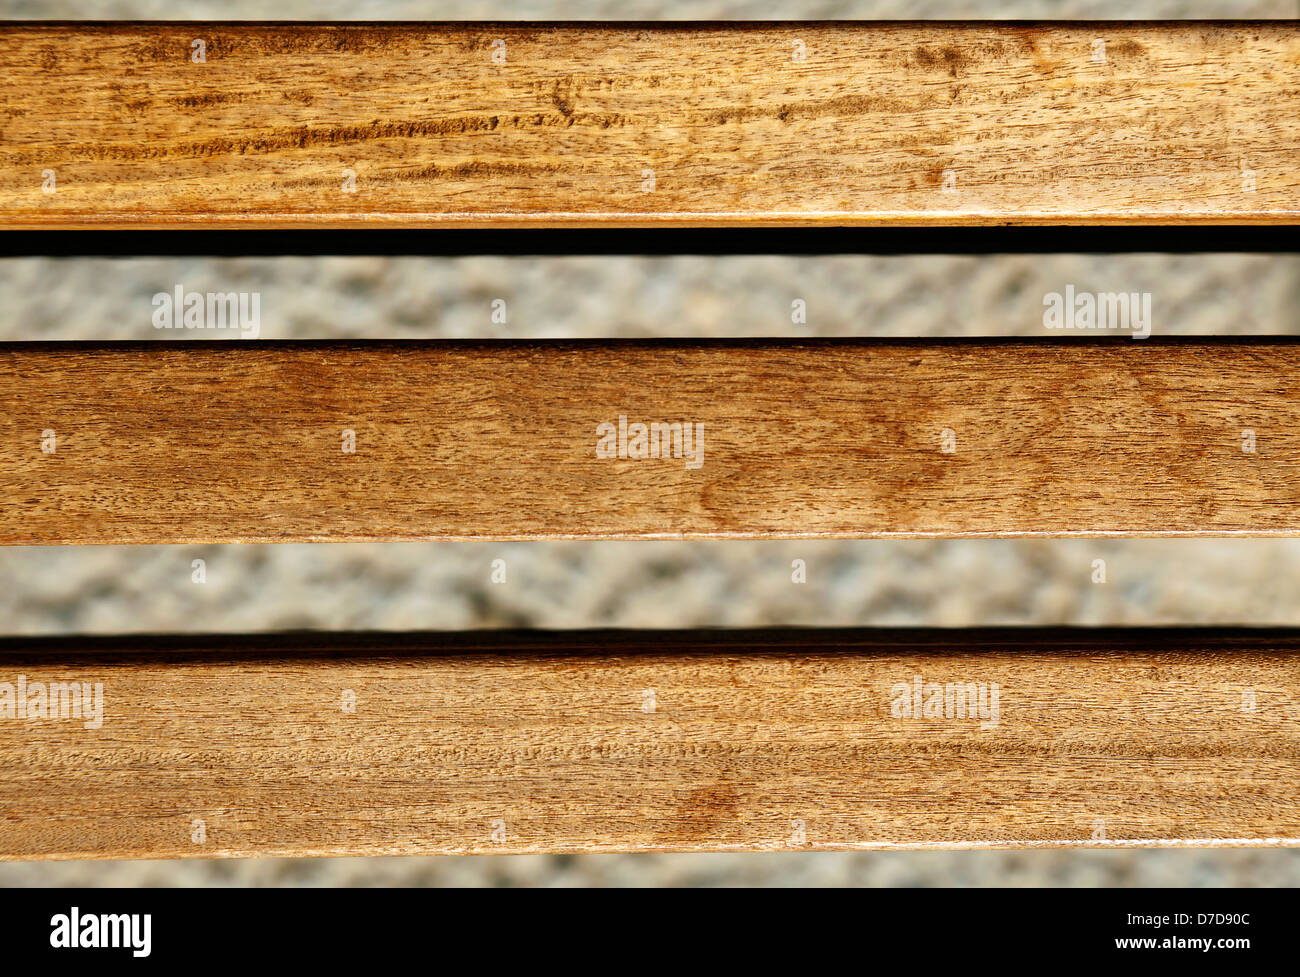 Sunlit wooden beams on blurry background. Stock Photo